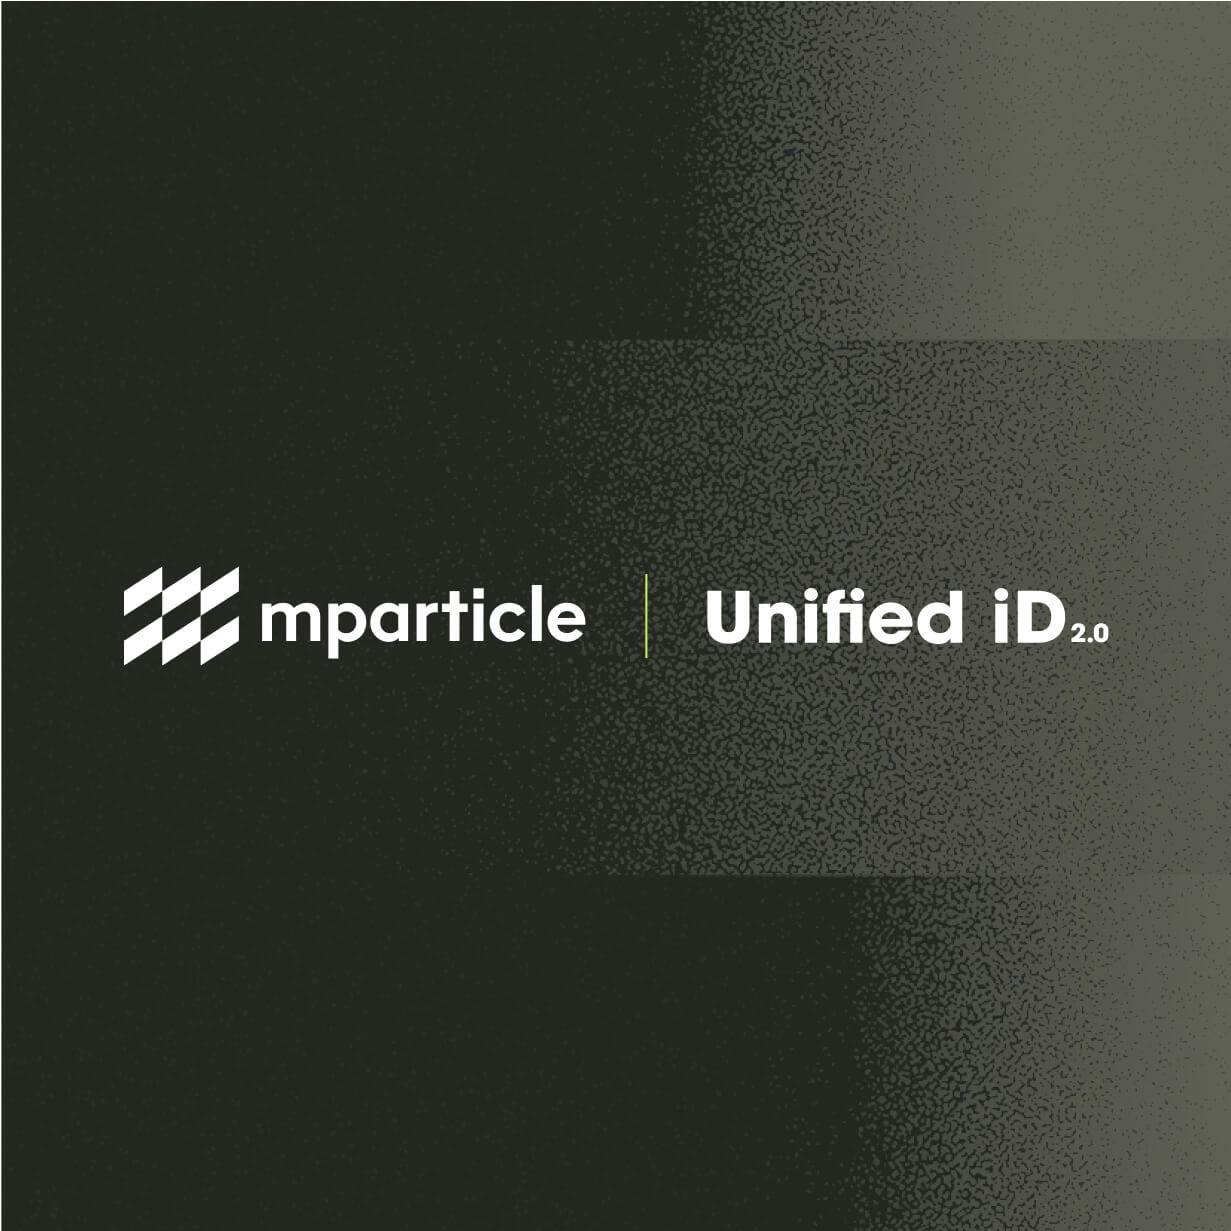 mParticle releases enhanced support for Unified ID 2.0 (UID2)